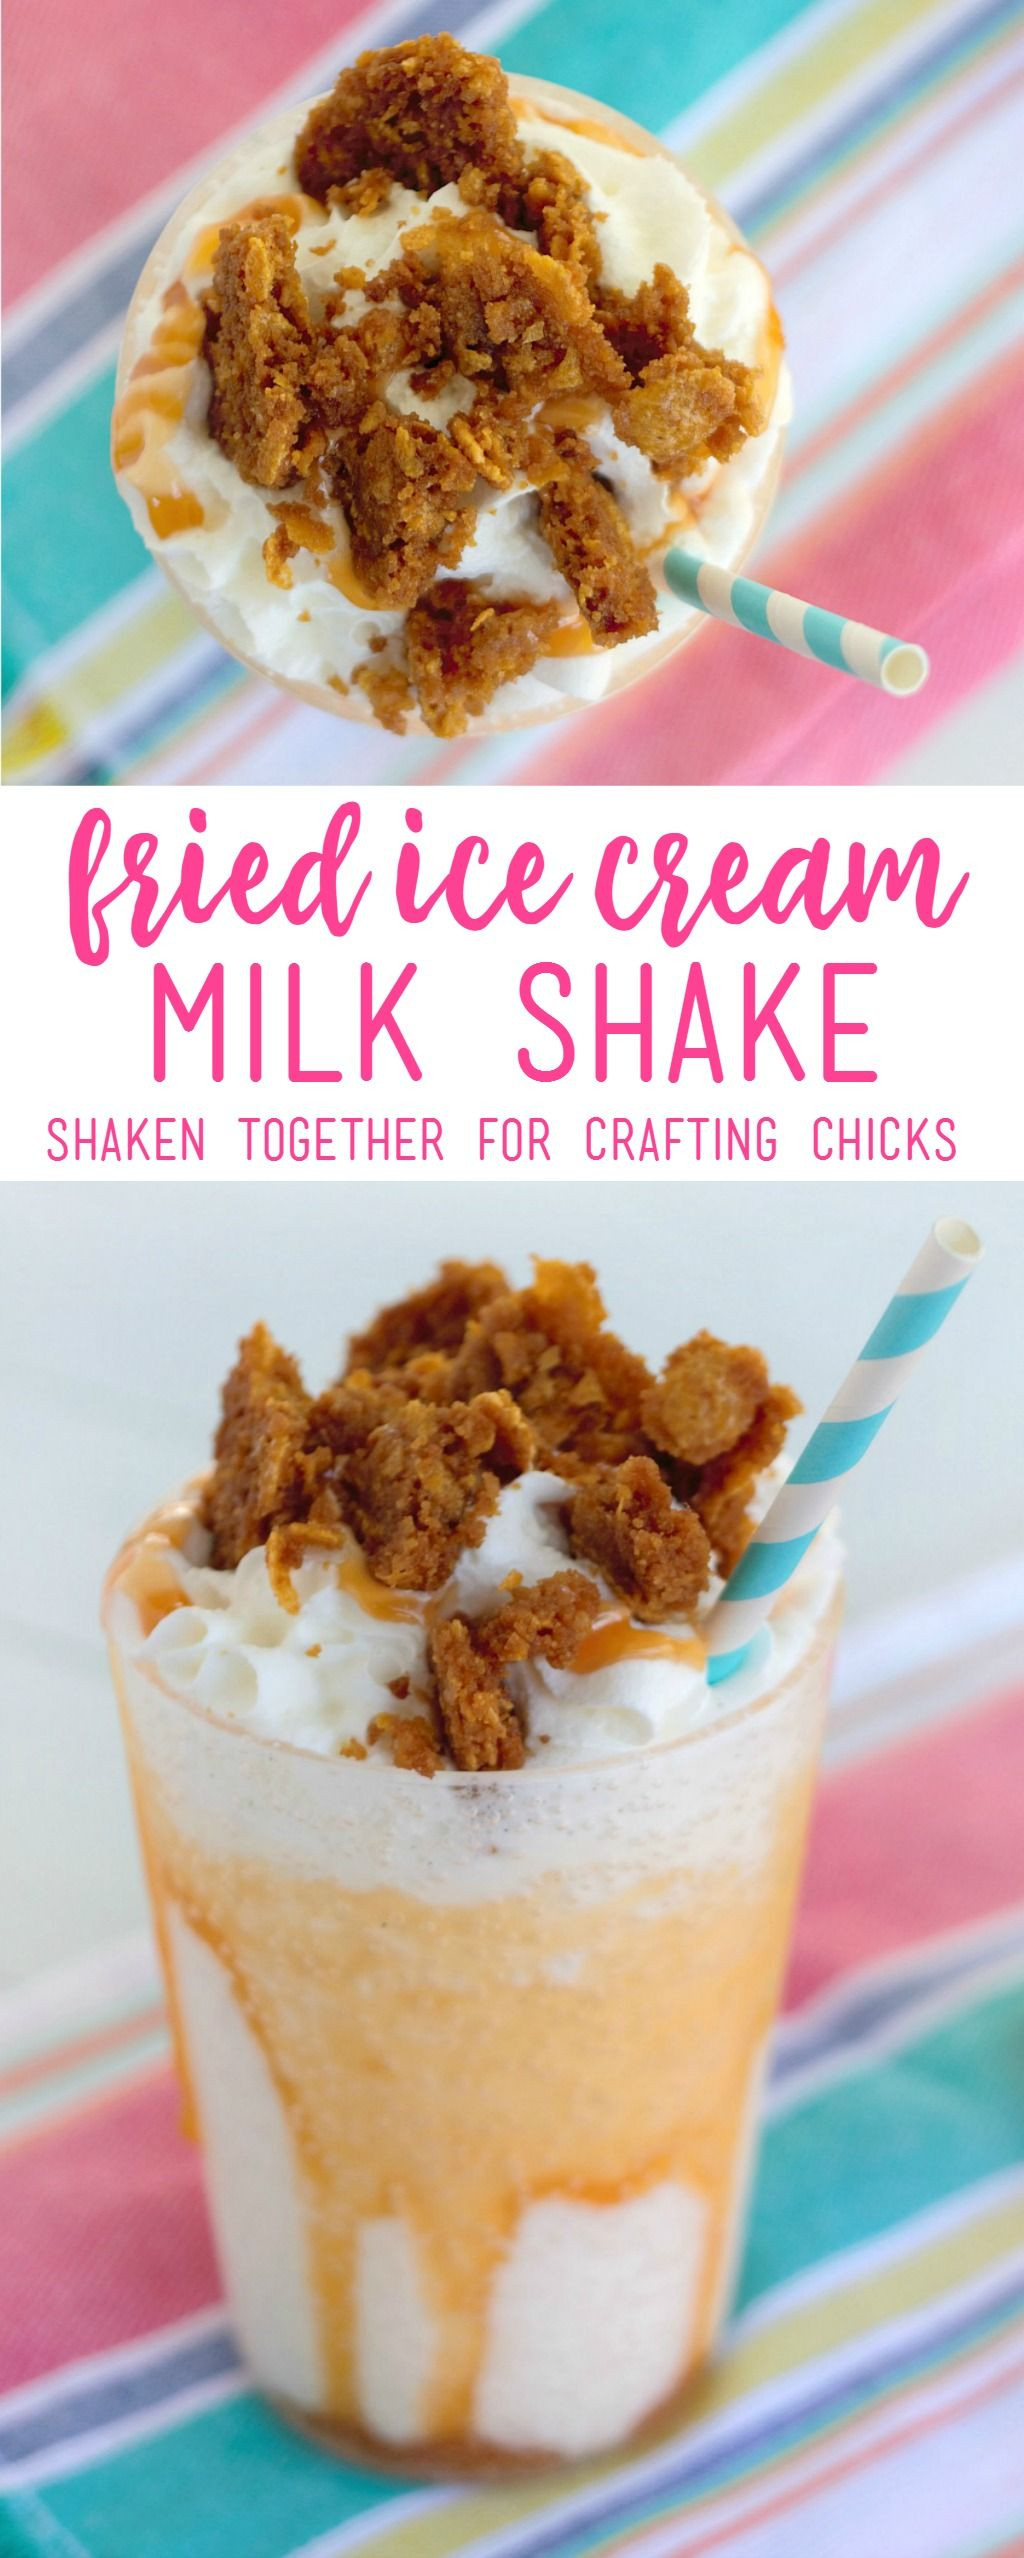 Beverages &amp; Frosty Dairy Desserts
 Fried Ice Cream Milk Shake for Cinco de Mayo